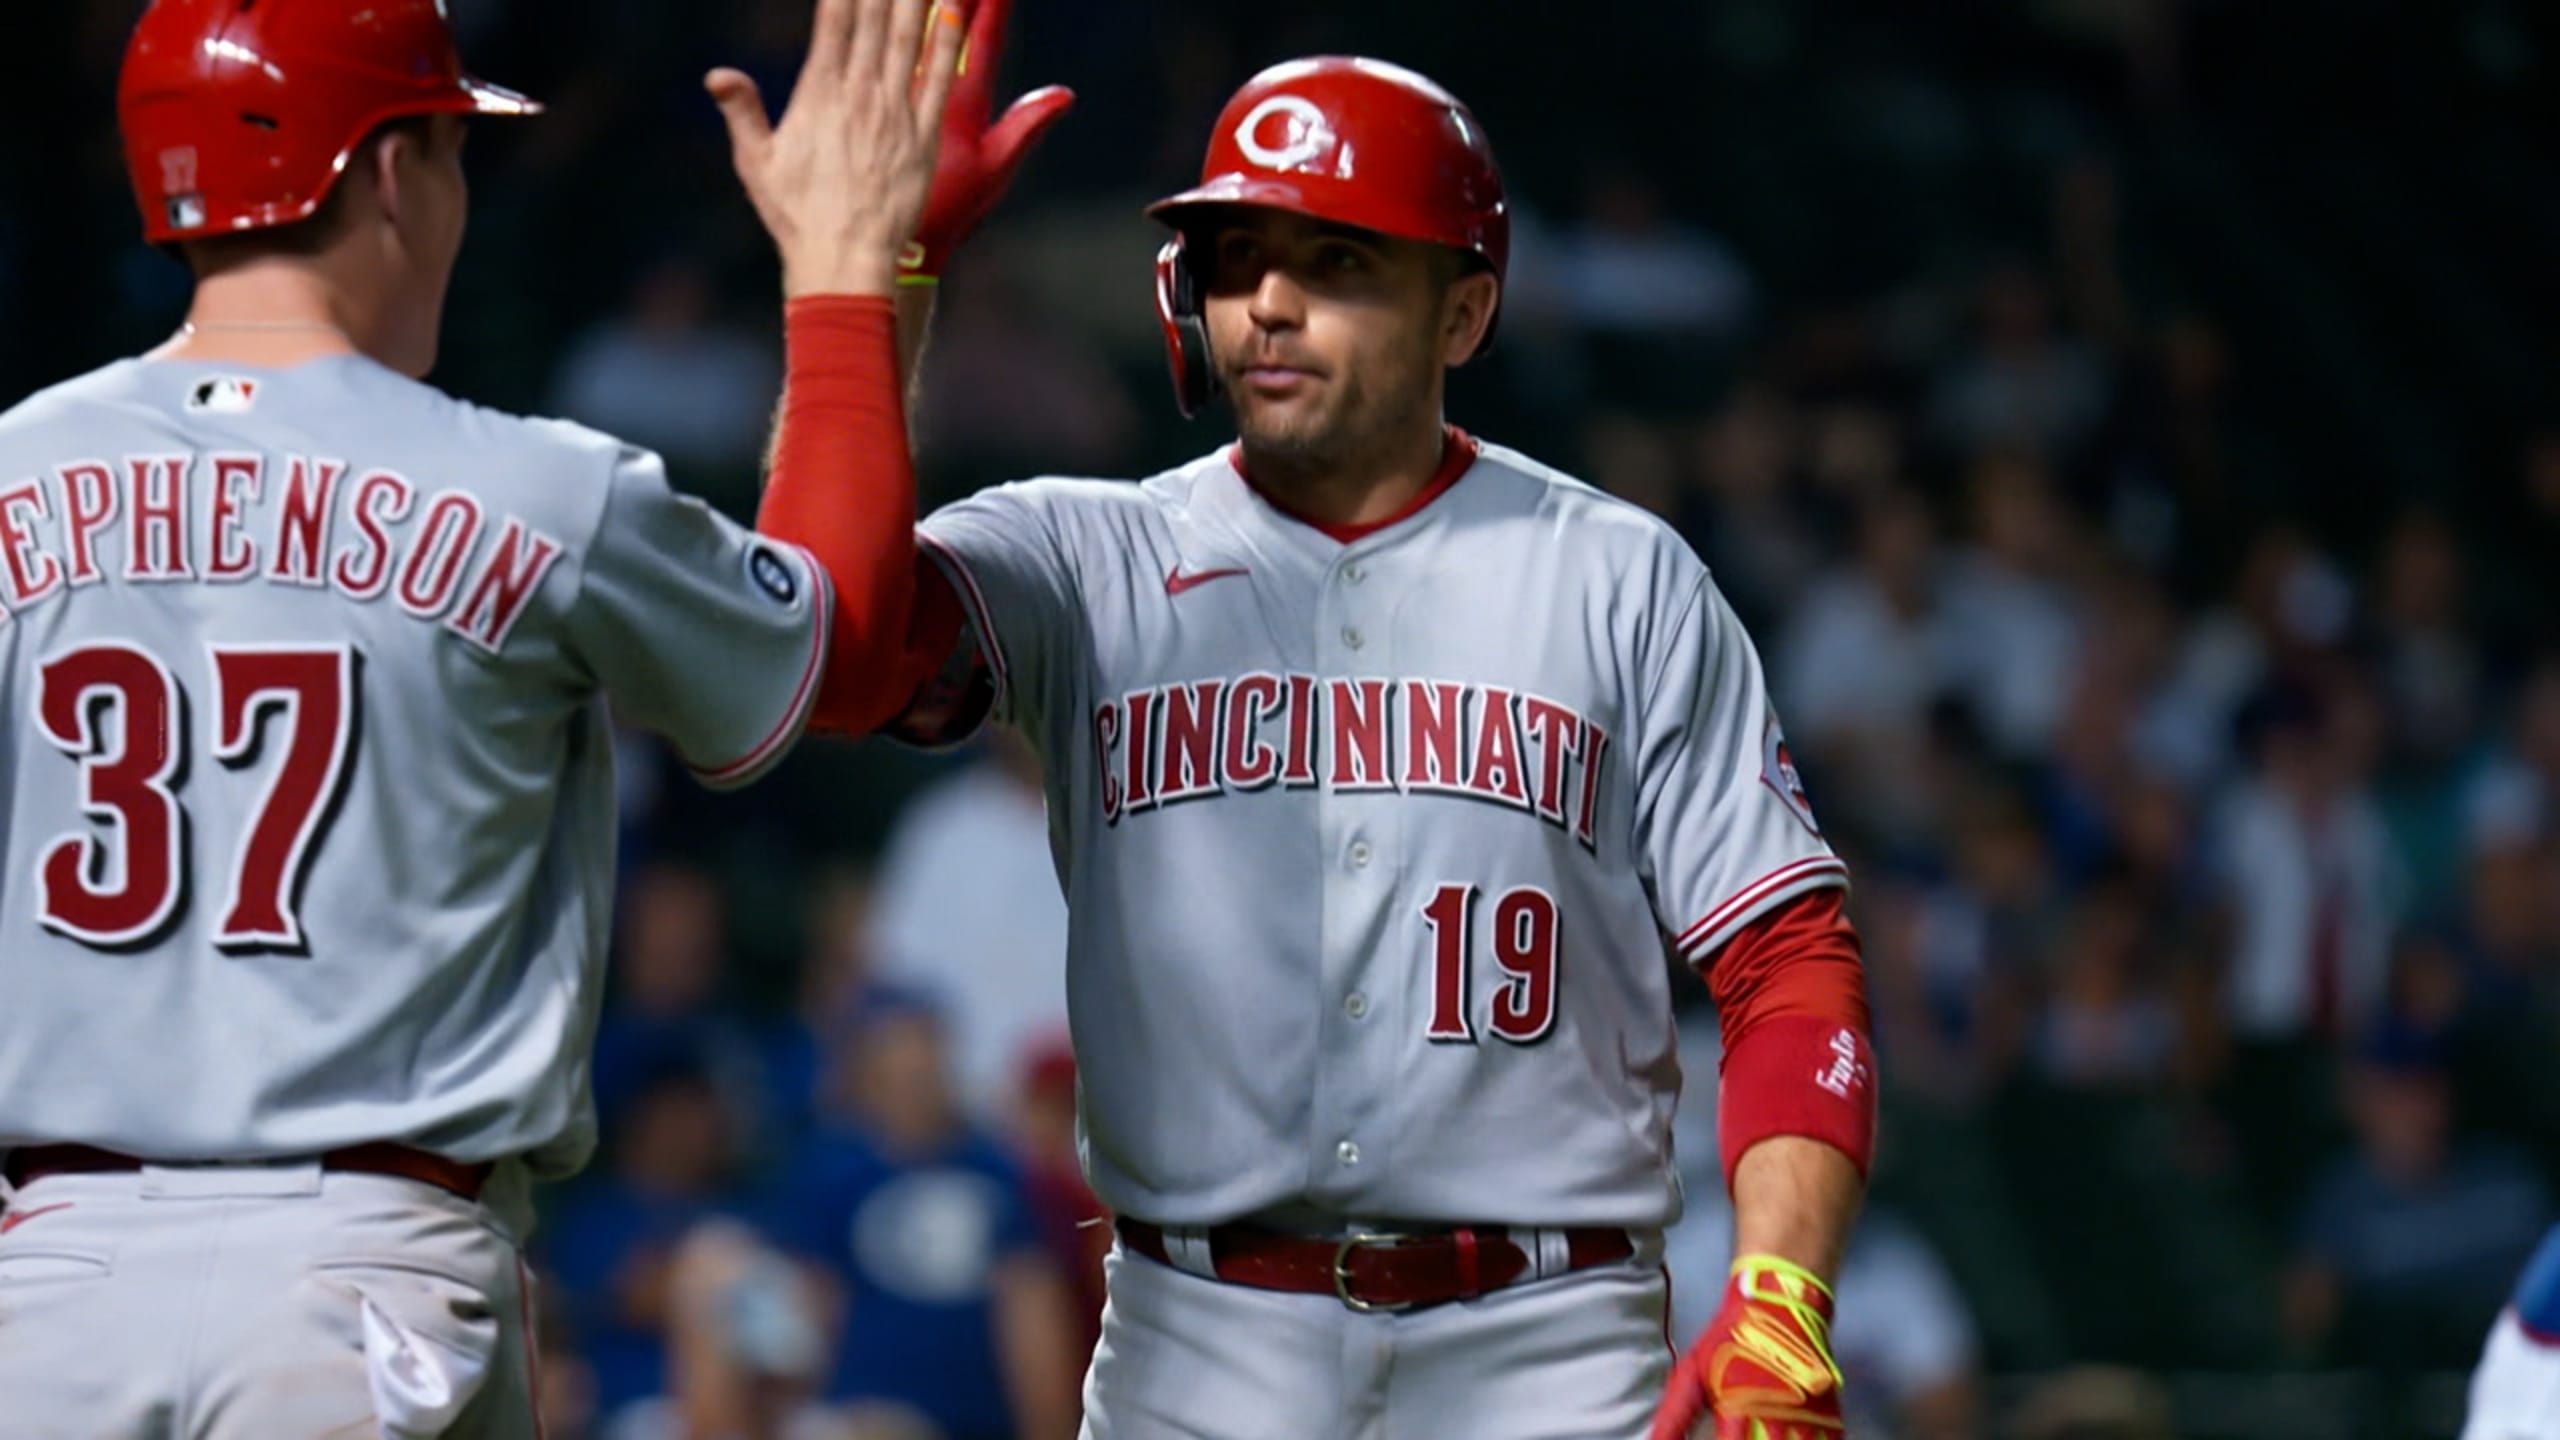 Joey Votto has 4 homers over his last 5 games 💥‼️